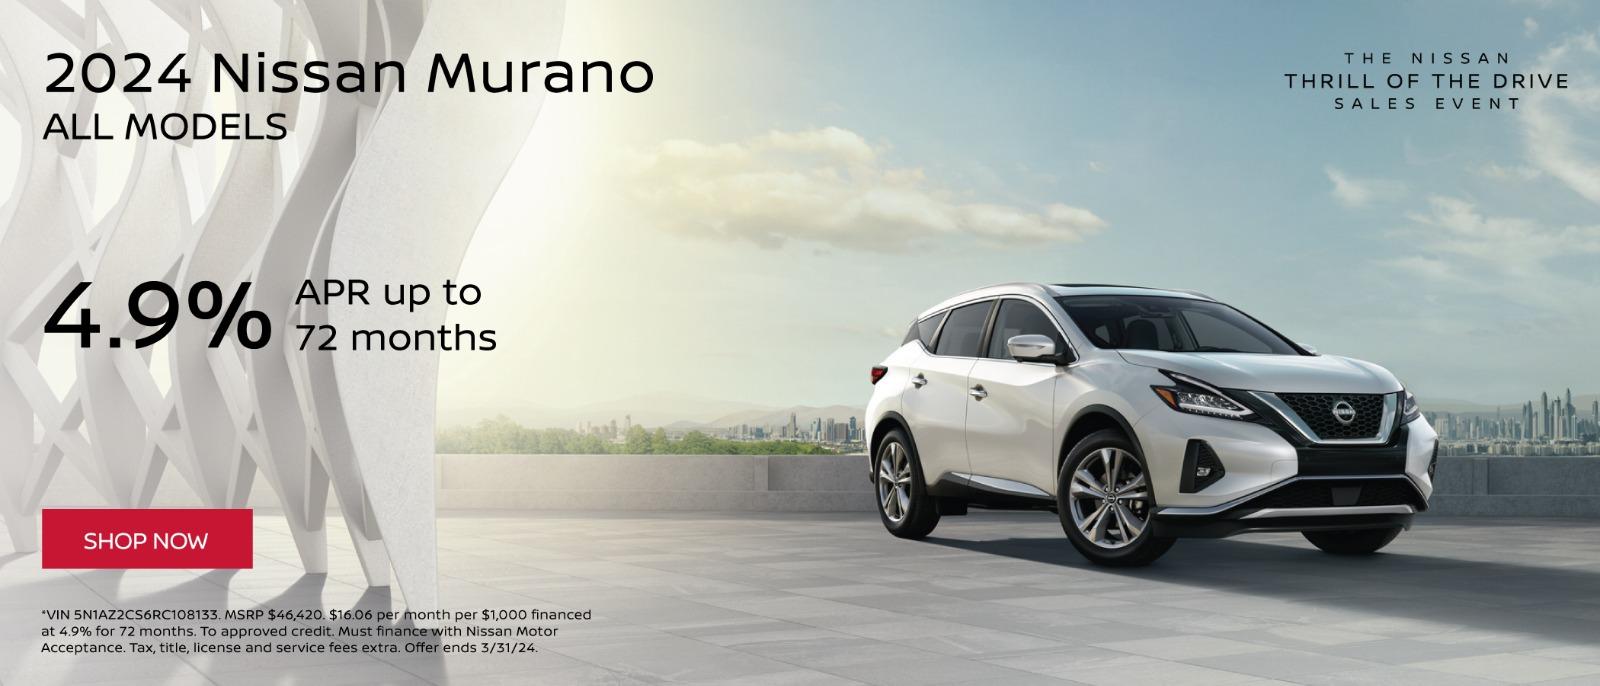 2024 Nissan Murano 4.9% APR Up to 72months